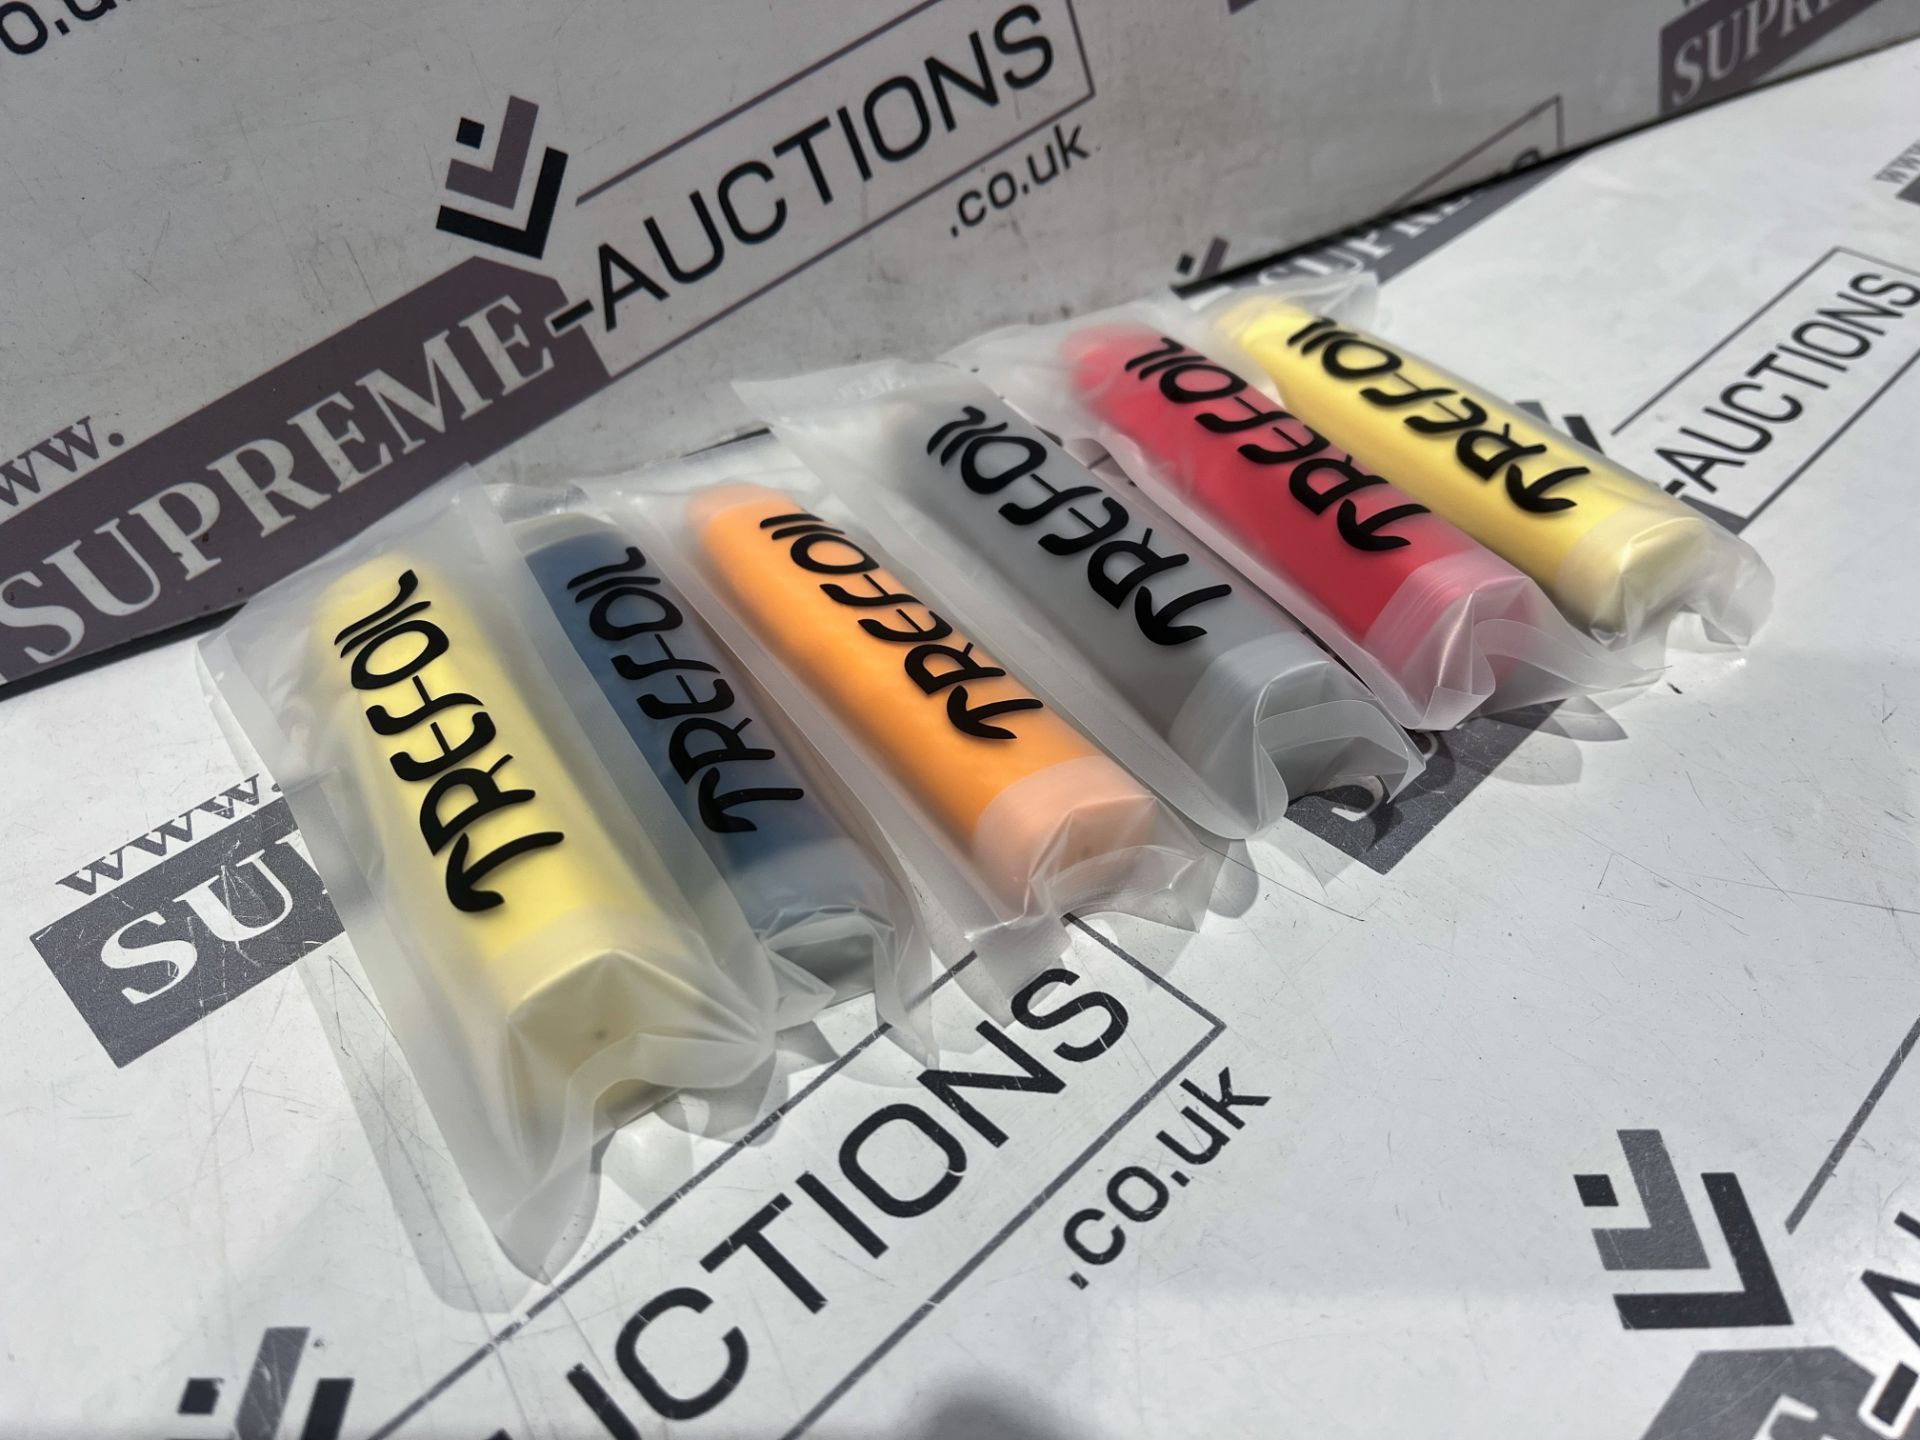 TRADE LOT 500 X BRAND NEW TREFOIL DISPOSABLE VAPES (FLAVOURS AND NICOTINE CONTENT MAY VARY) R3